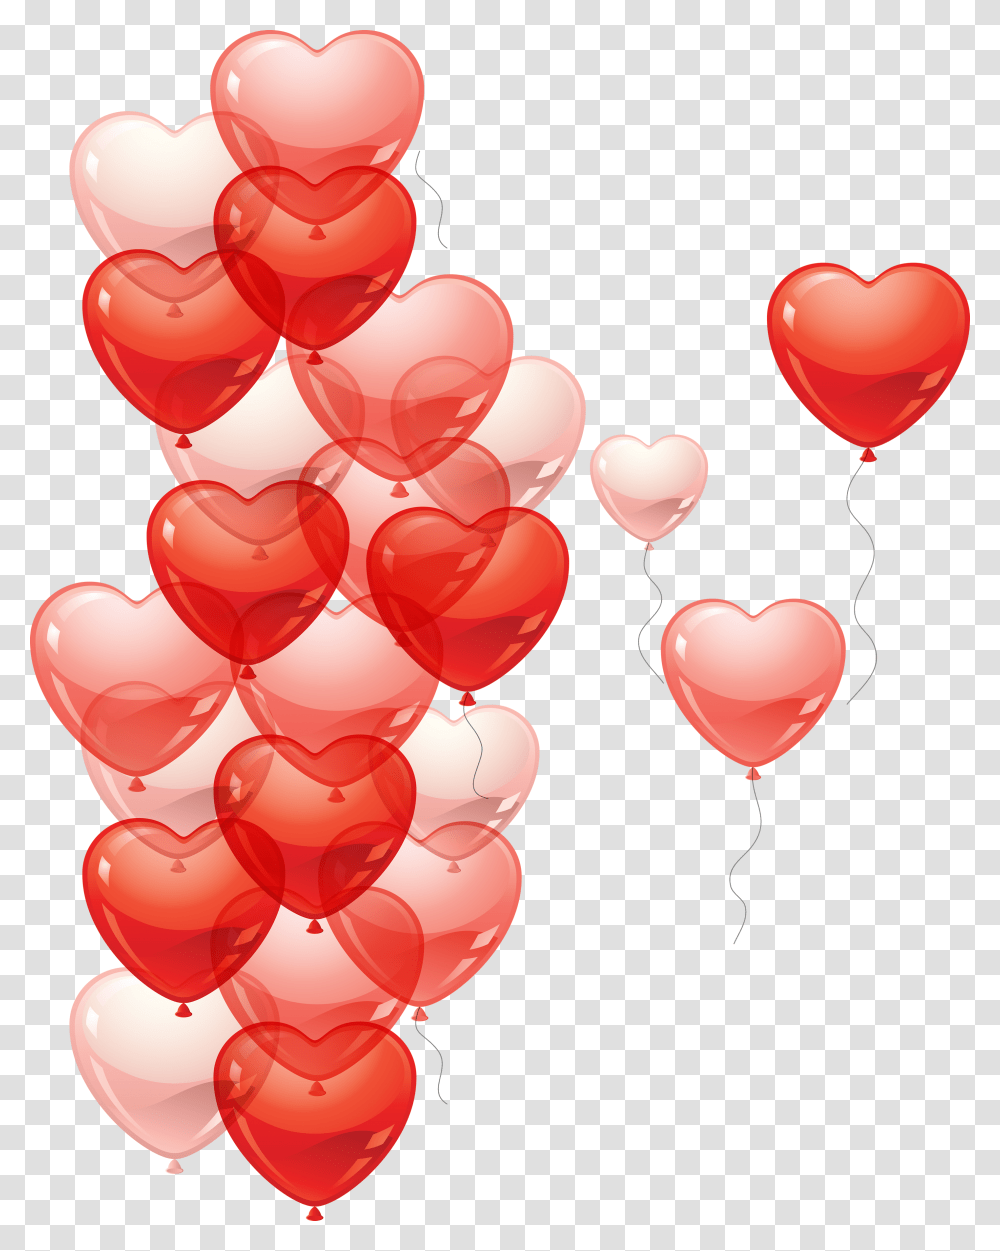 Heart Shape Ballons For Web Designing Images Download Heart Balloon, Plant Transparent Png